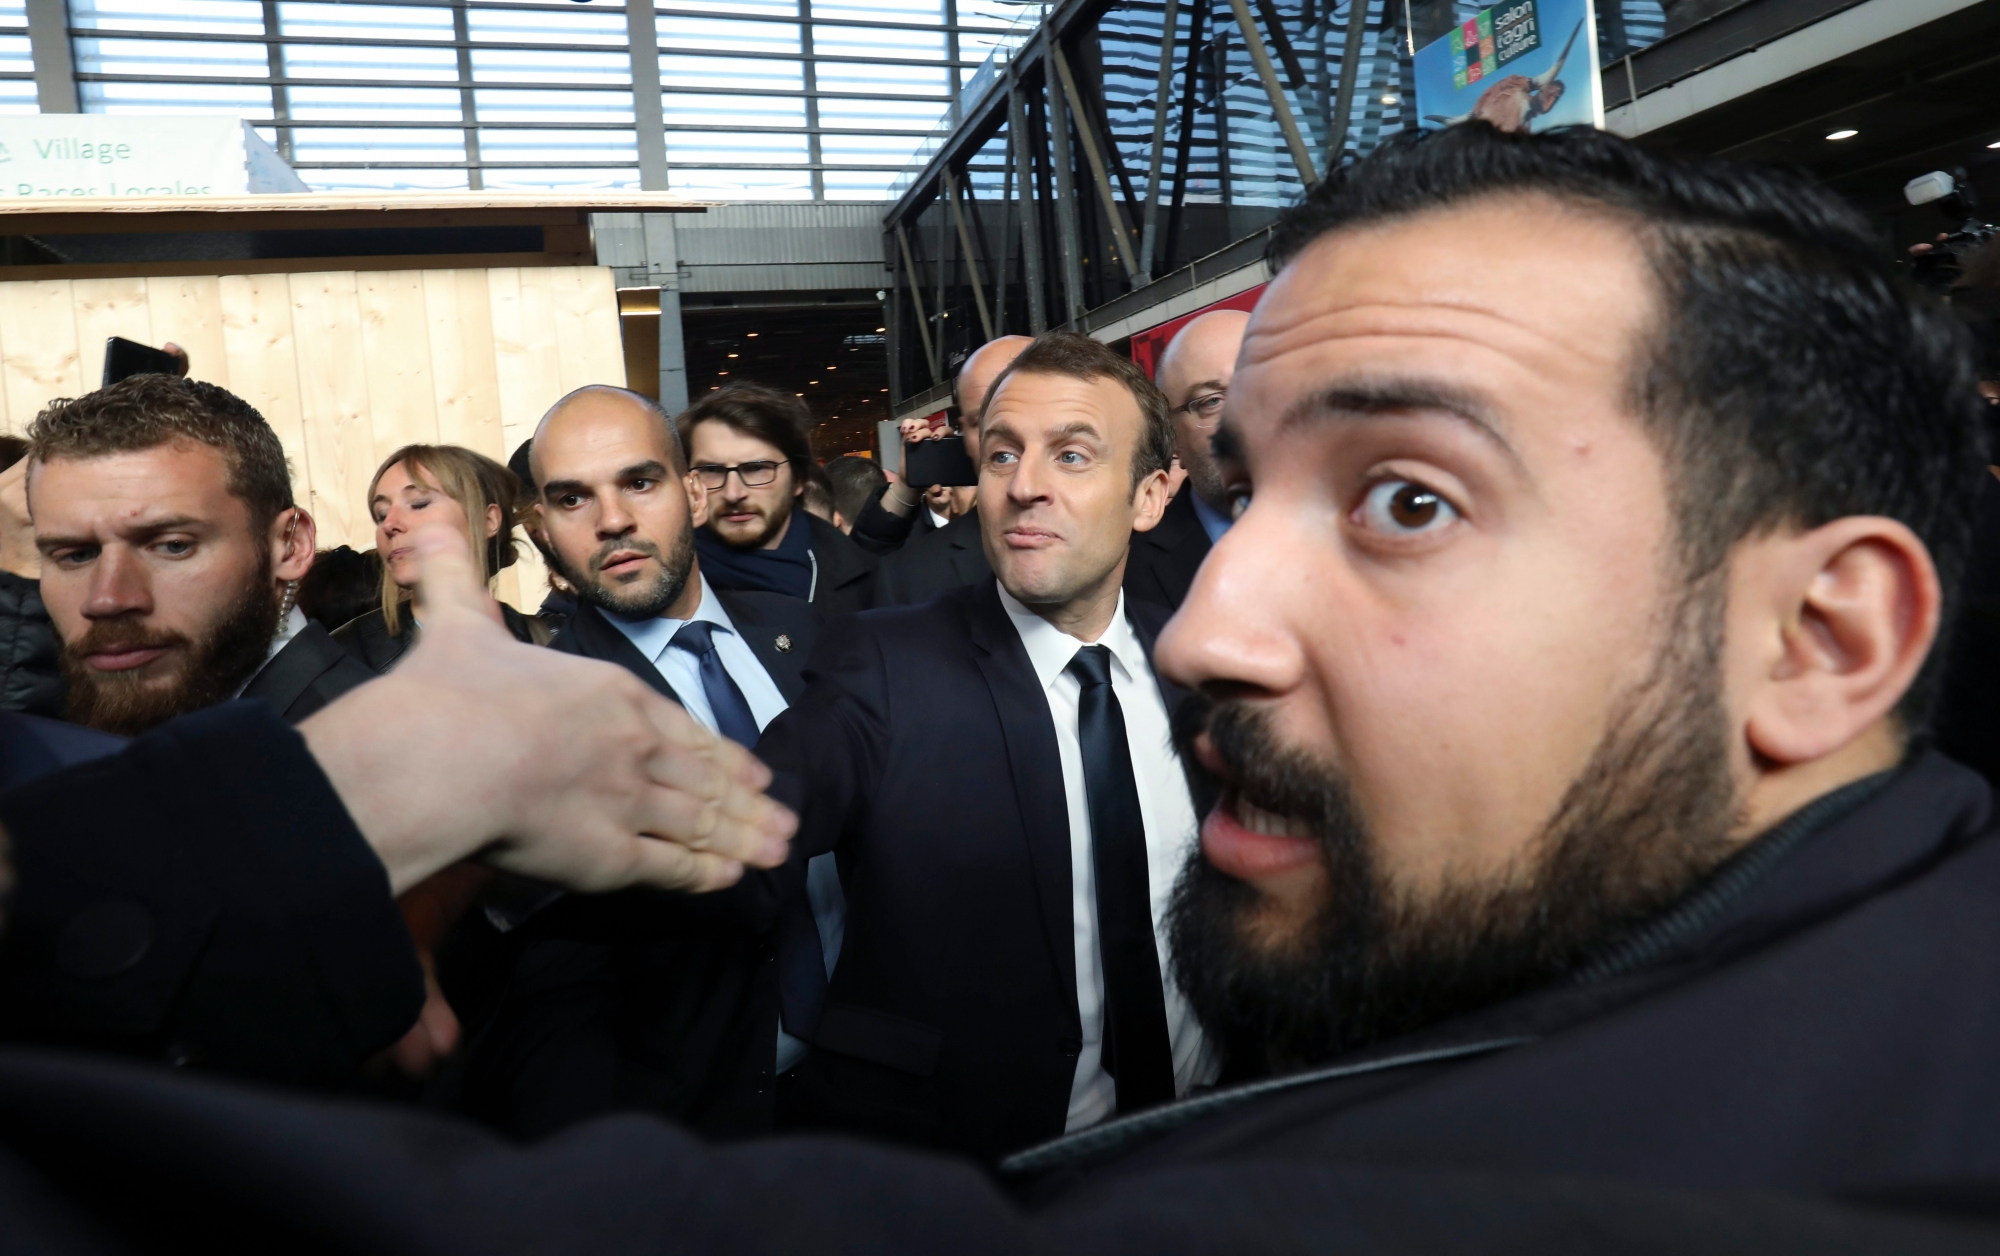 epa06906477 French president Emmanuel Macron (C) shakes hands as the Elysee senior security officer Alexandre Benalla (R) looks on during a visit at the 55th International Agriculture Fair (Salon de l'Agriculture) at the Porte de Versailles exhibition center in Paris, France, 24 February 2018 (issued on 23 July 2018). A video has been released on 19 July 2018 allegedly showing Alexandre Benalla, the French President Emmanuel Macron's deputy chief of staff, wearing a riot helmet and police uniform while attacking protesters during street demonstrations on 01 May 2018.  EPA/LUDOVIC MARIN / POOL MAXPPP OUT FRANCE GOVERNMENT ELYSEE SECURITY OFFICER SCANDAL